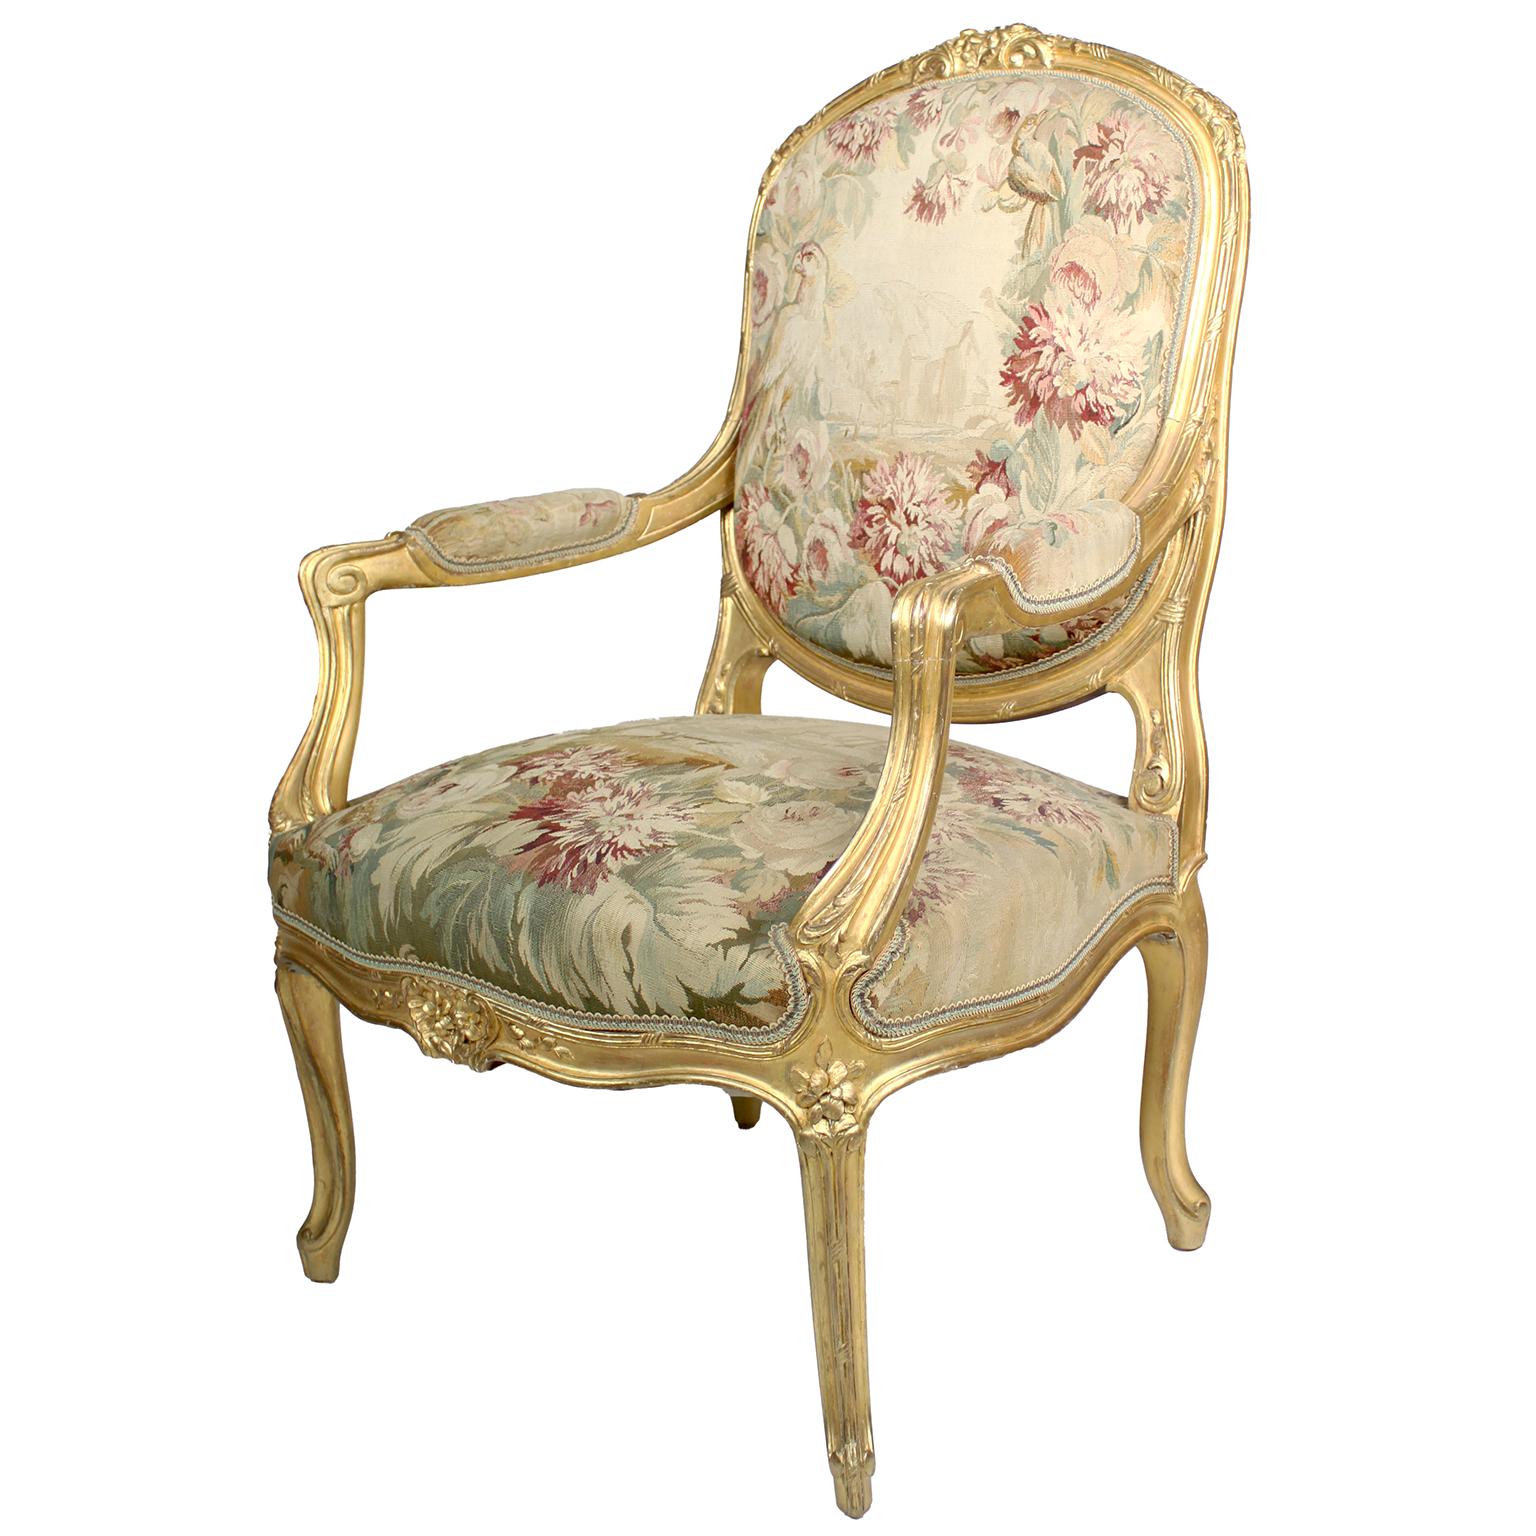 French 19th Century Louis XV Style Three-Piece Giltwood and Aubusson Salon Suite For Sale 7